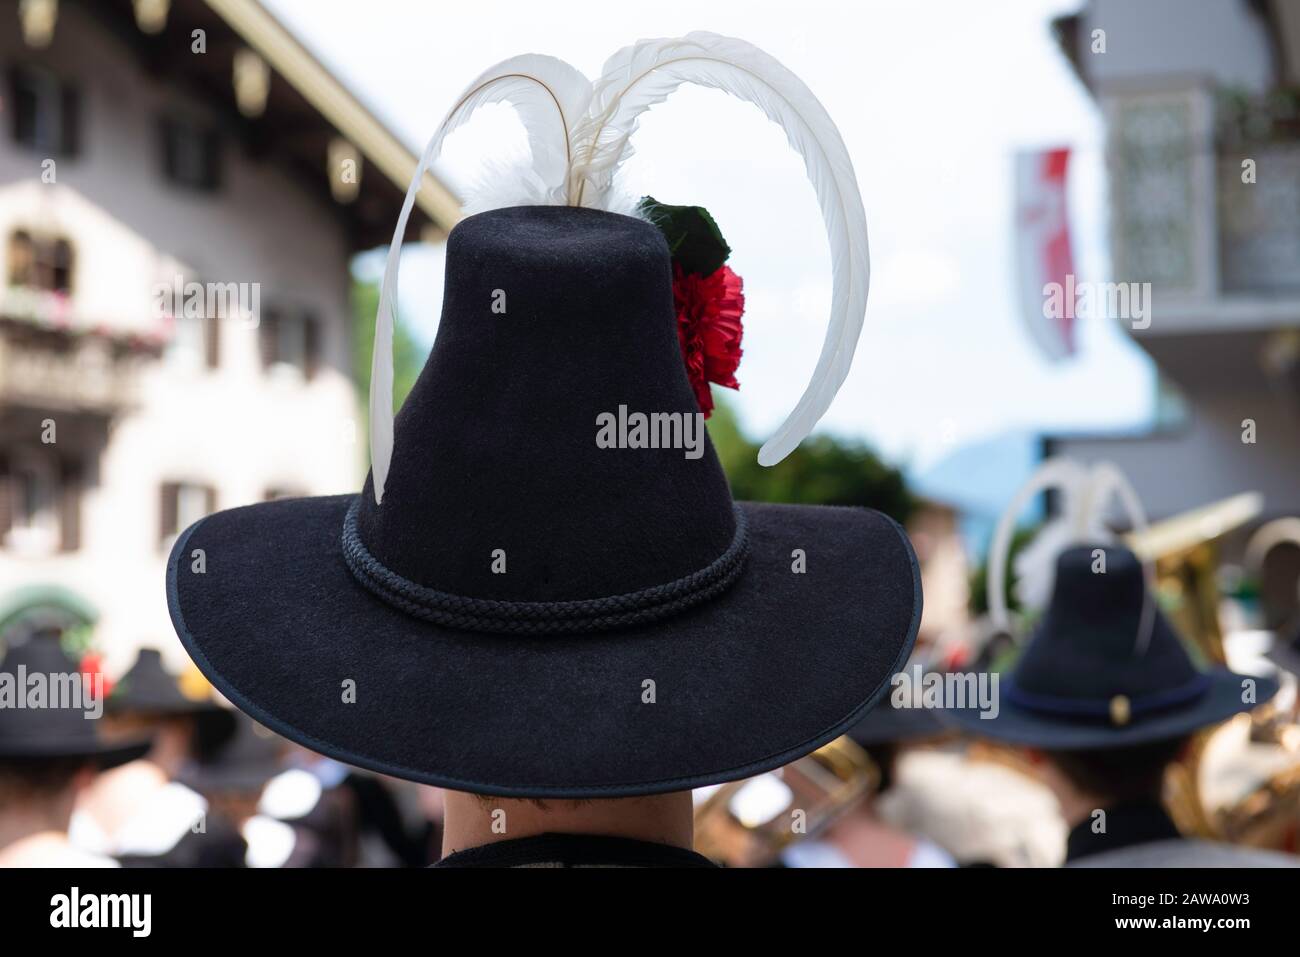 Mayrhofen, Zillertal valley, Austria - june 20, 2019 summer festivals, Traditional Clothing, Traditional cuisine Stock Photo